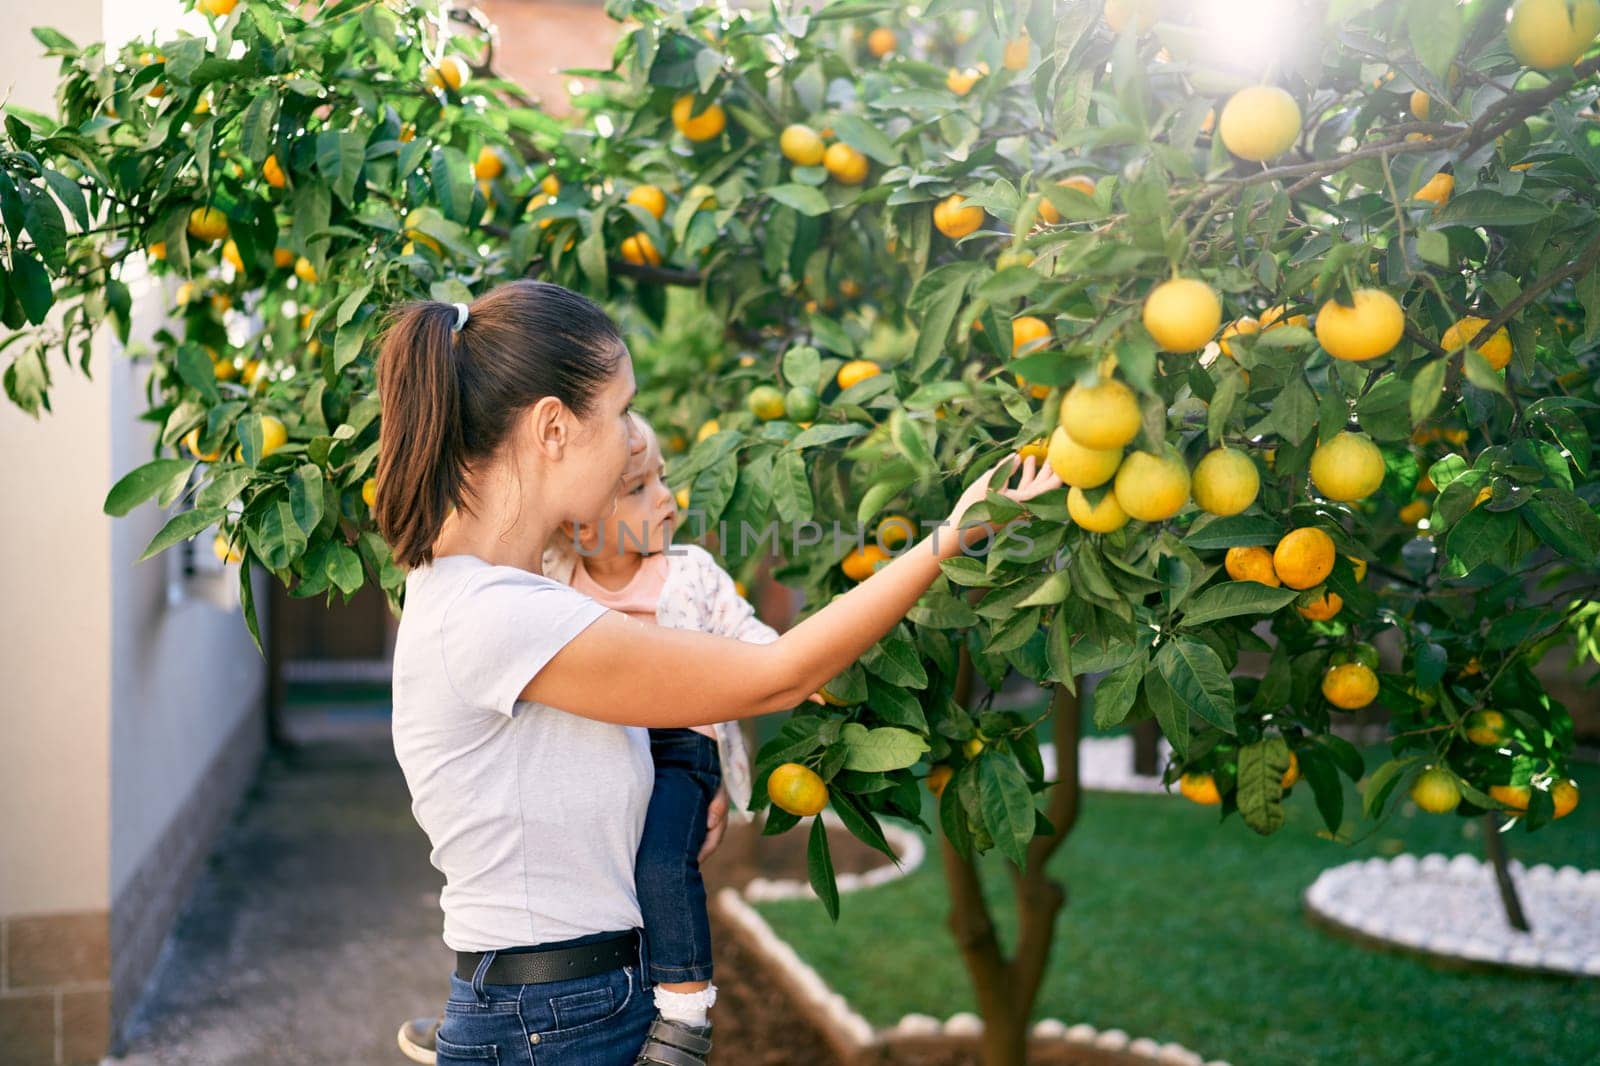 Mom shows tangerines on tree branches in the garden to a little girl in her arms. High quality photo